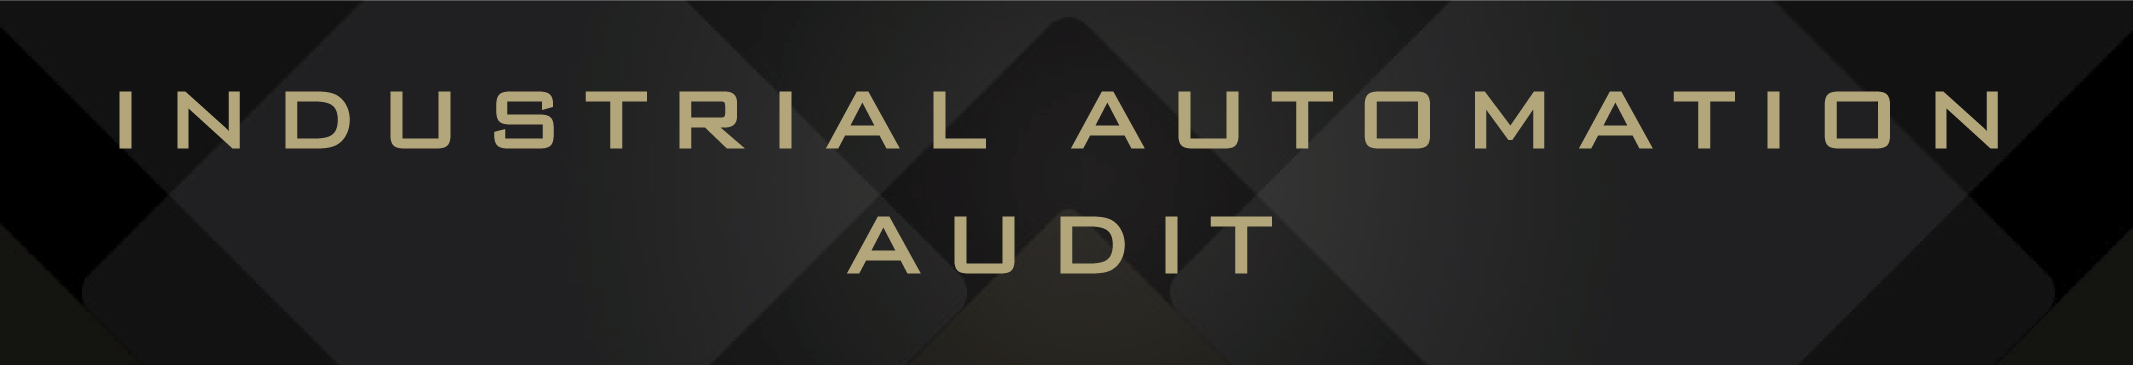 Industrial Automation Audit Page Banner